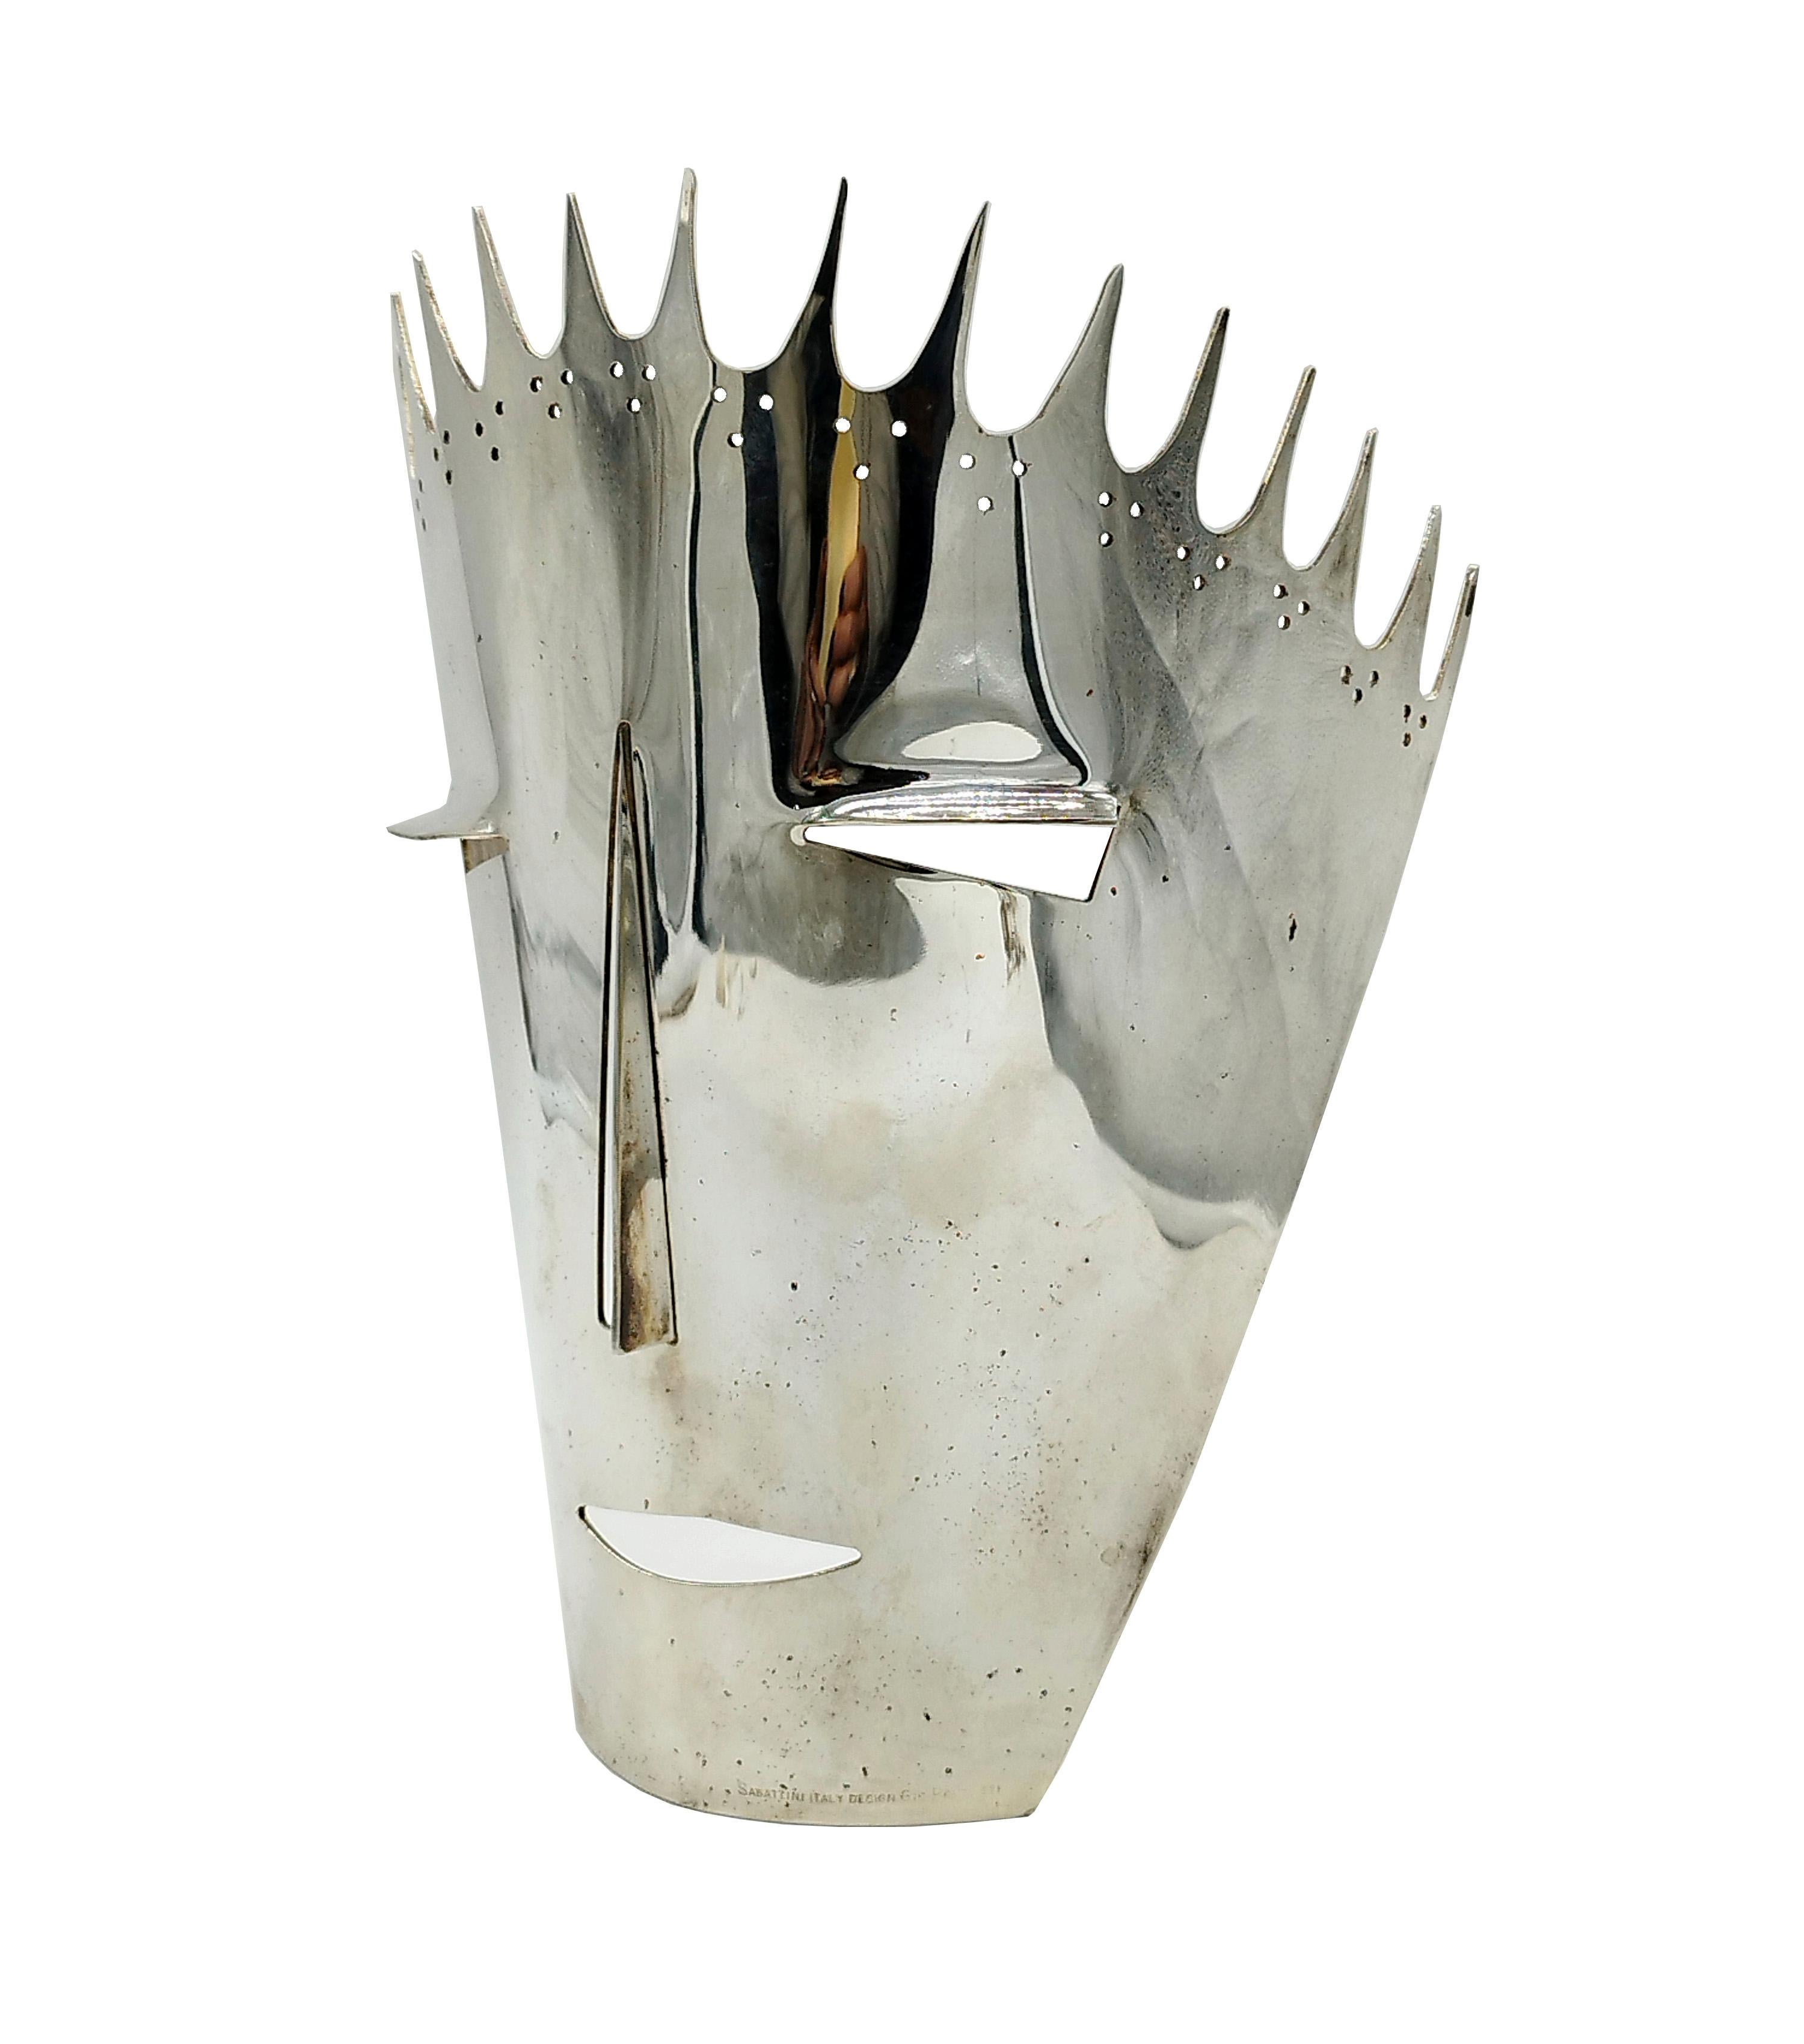 Sculpture and large decorative mask in perforated silver-plated metal 'The Devil' designed by Gio' Ponti and produced by the firm Lino Sabattini,
Limited edition and signed at the bottom.